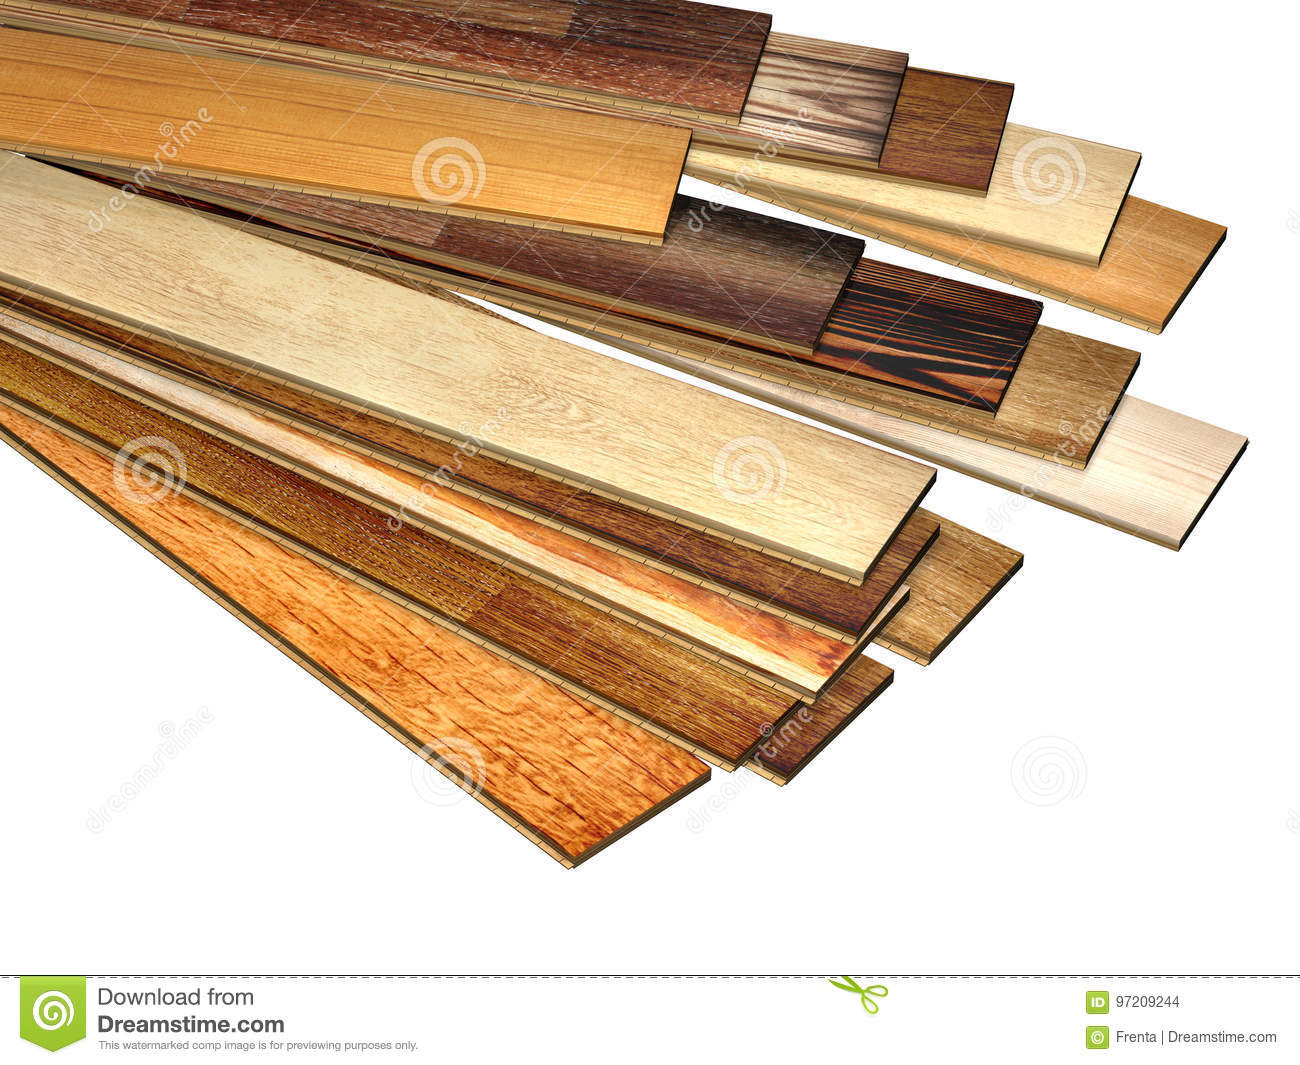 20 Trendy Can You Use Different Color Hardwood Floors 2024 free download can you use different color hardwood floors of new oak parquet of different colors stock illustration with regard to new oak parquet of different colors